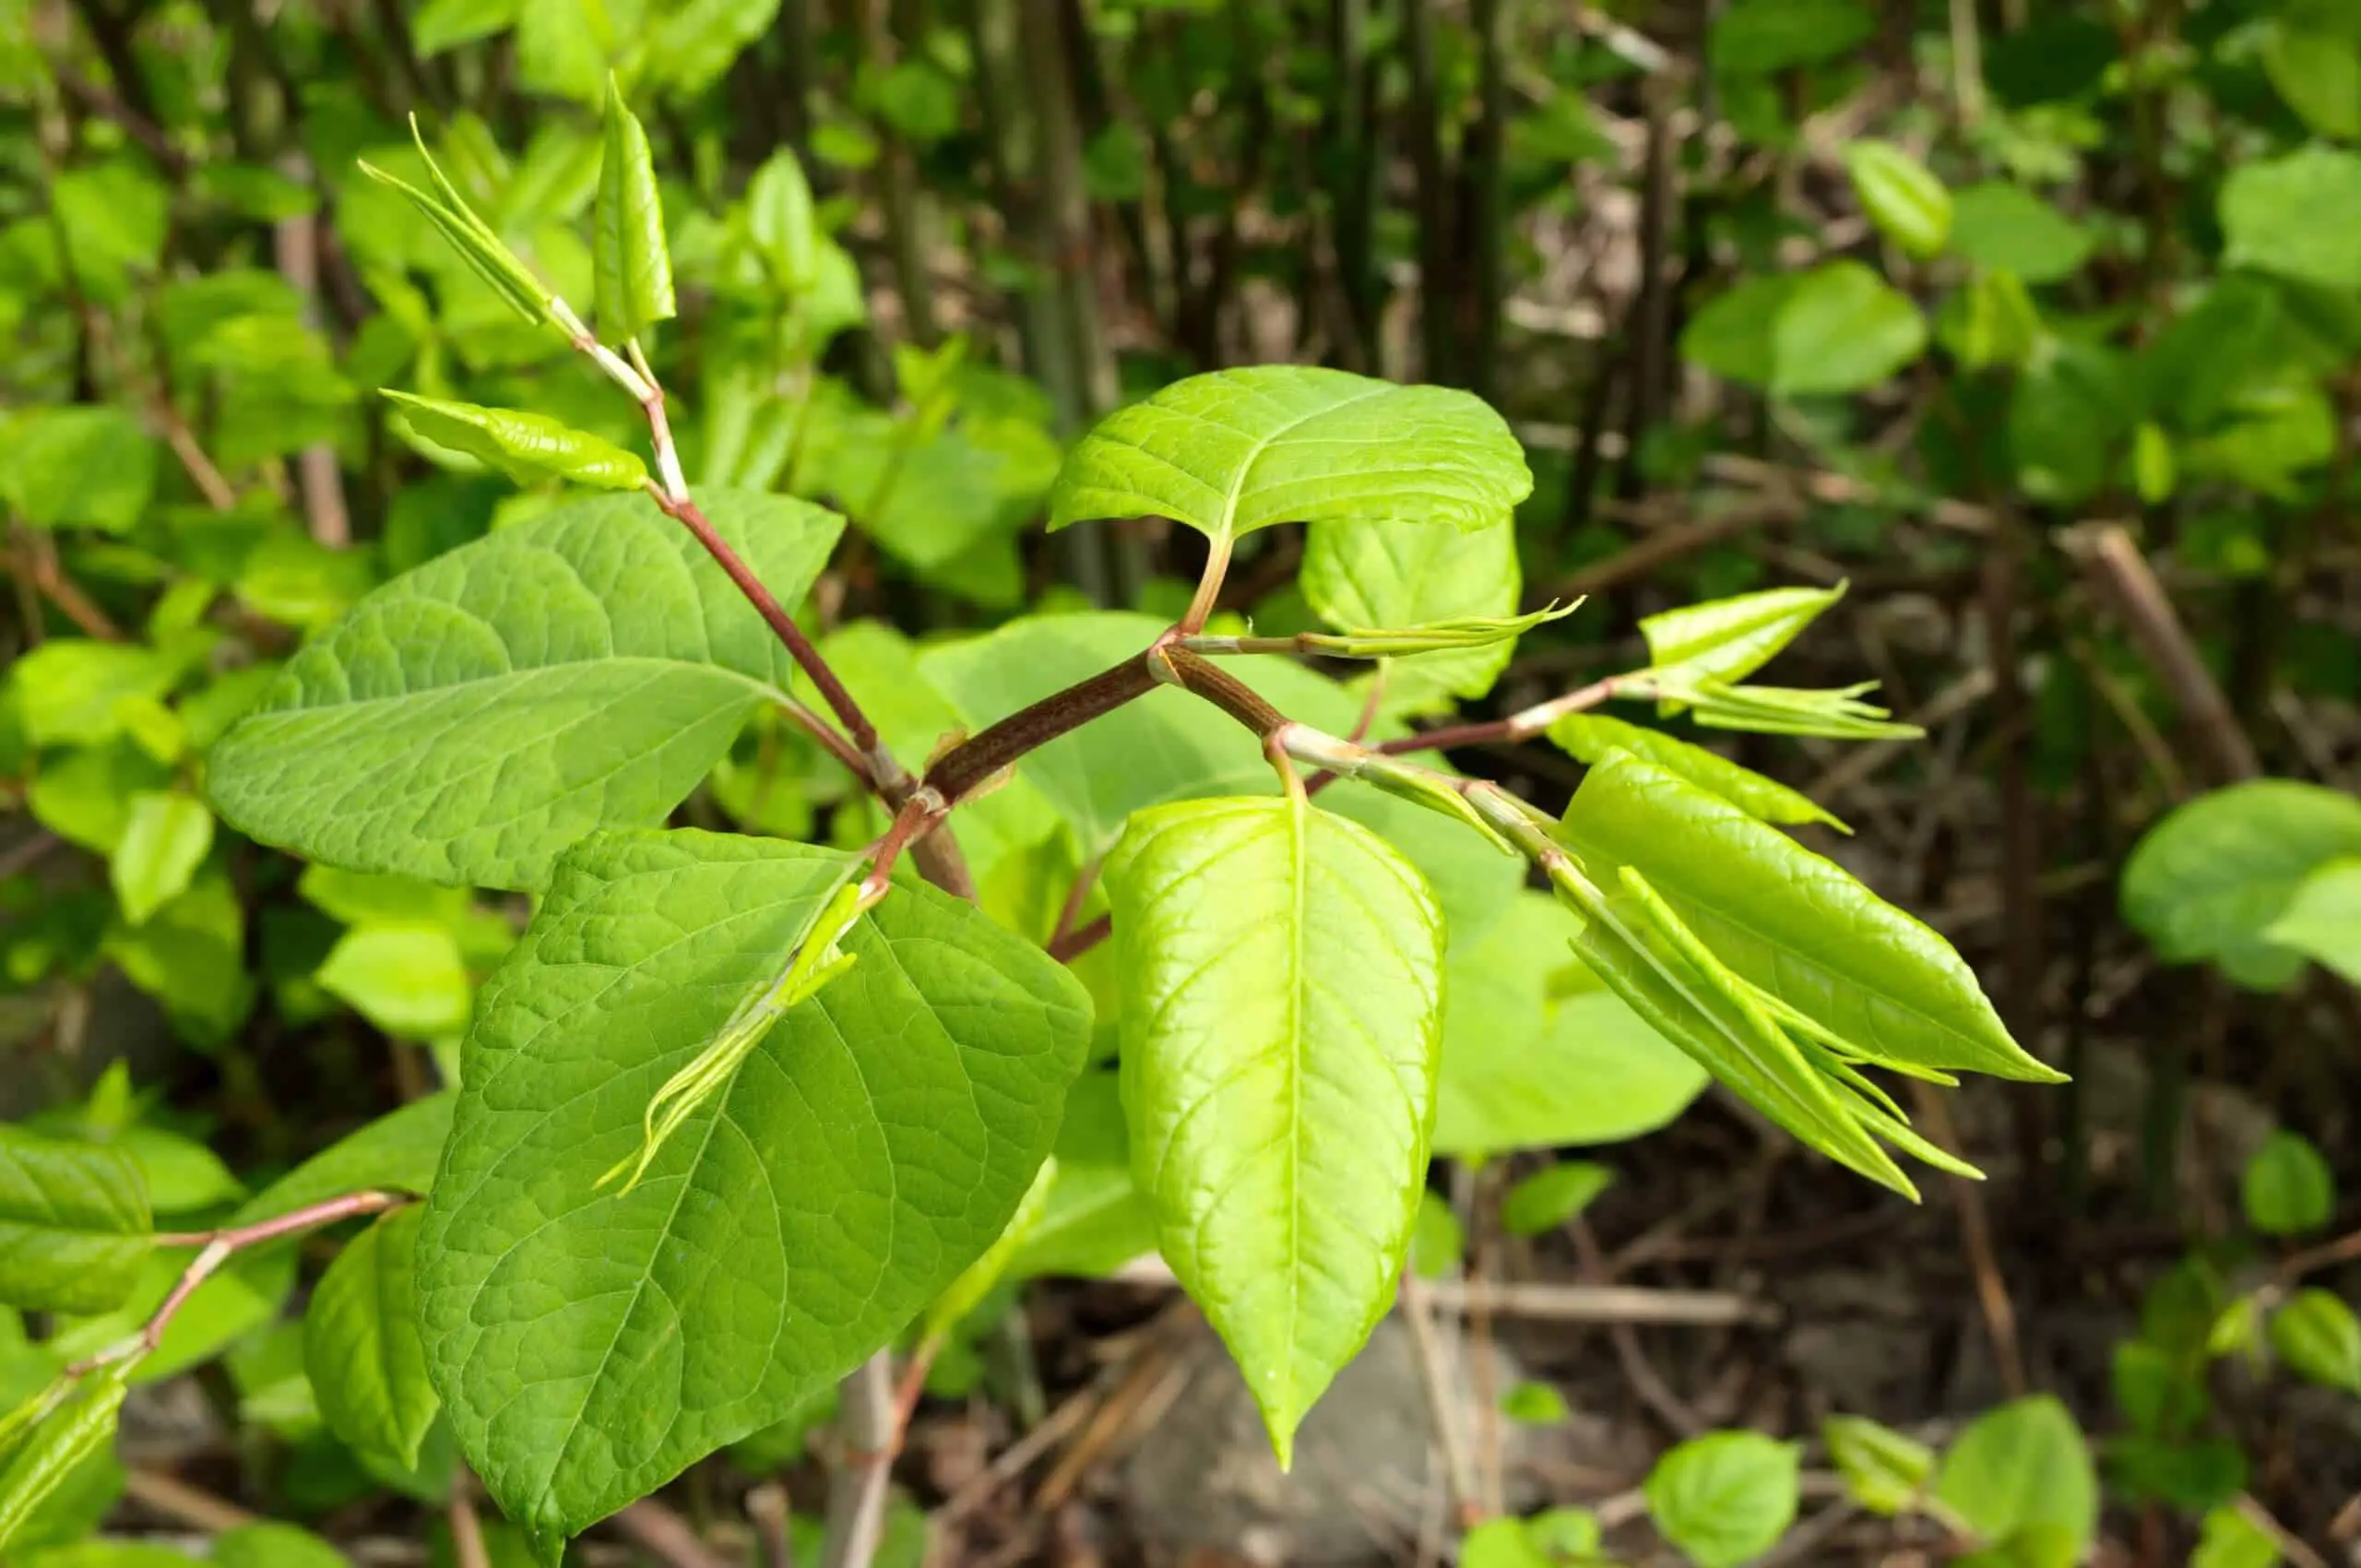 With so many leaves acquiring nutrients, sun and water, it is no wonder Japanese Knotweed goes so fast